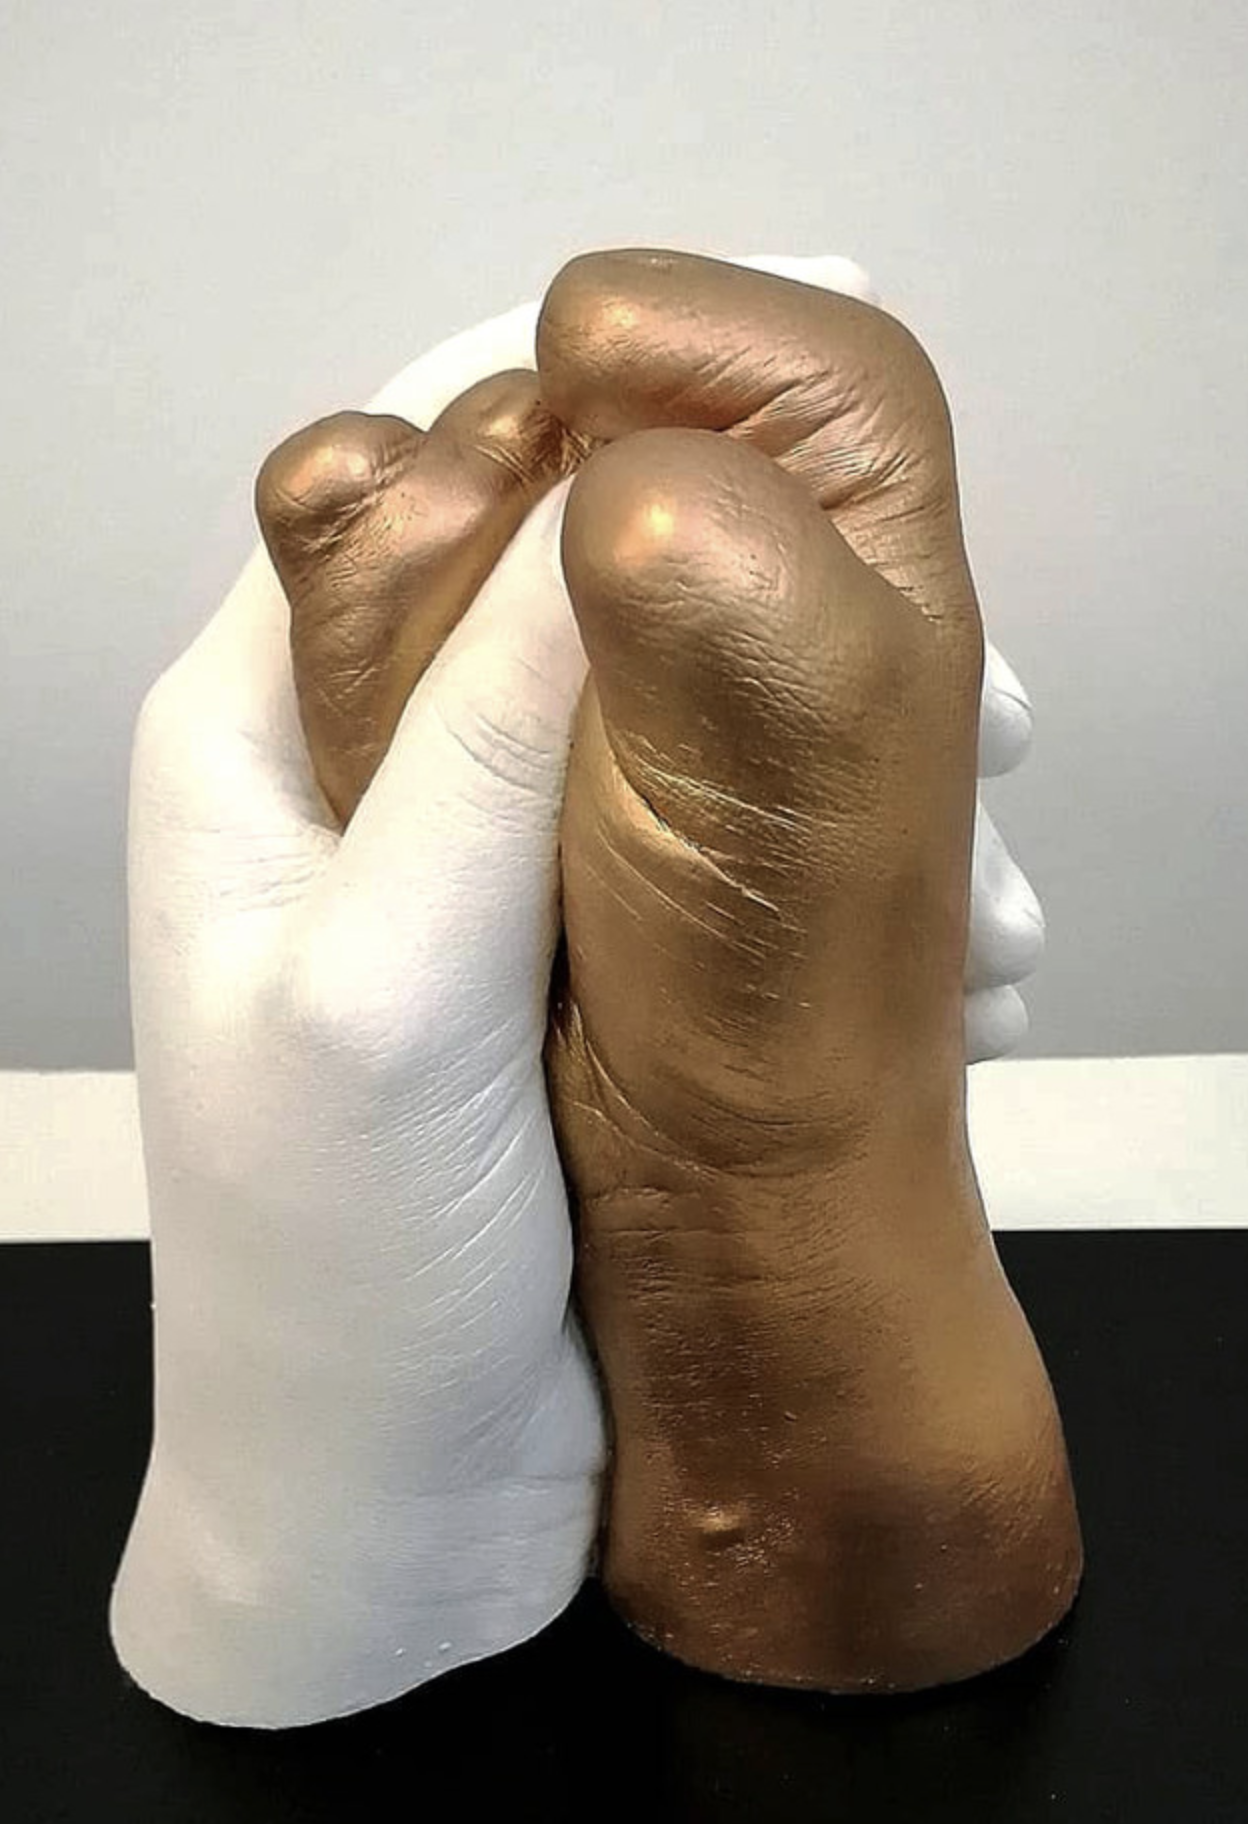 sculpture of two hands intertwined, one white and one gold with missing fingers and thumb